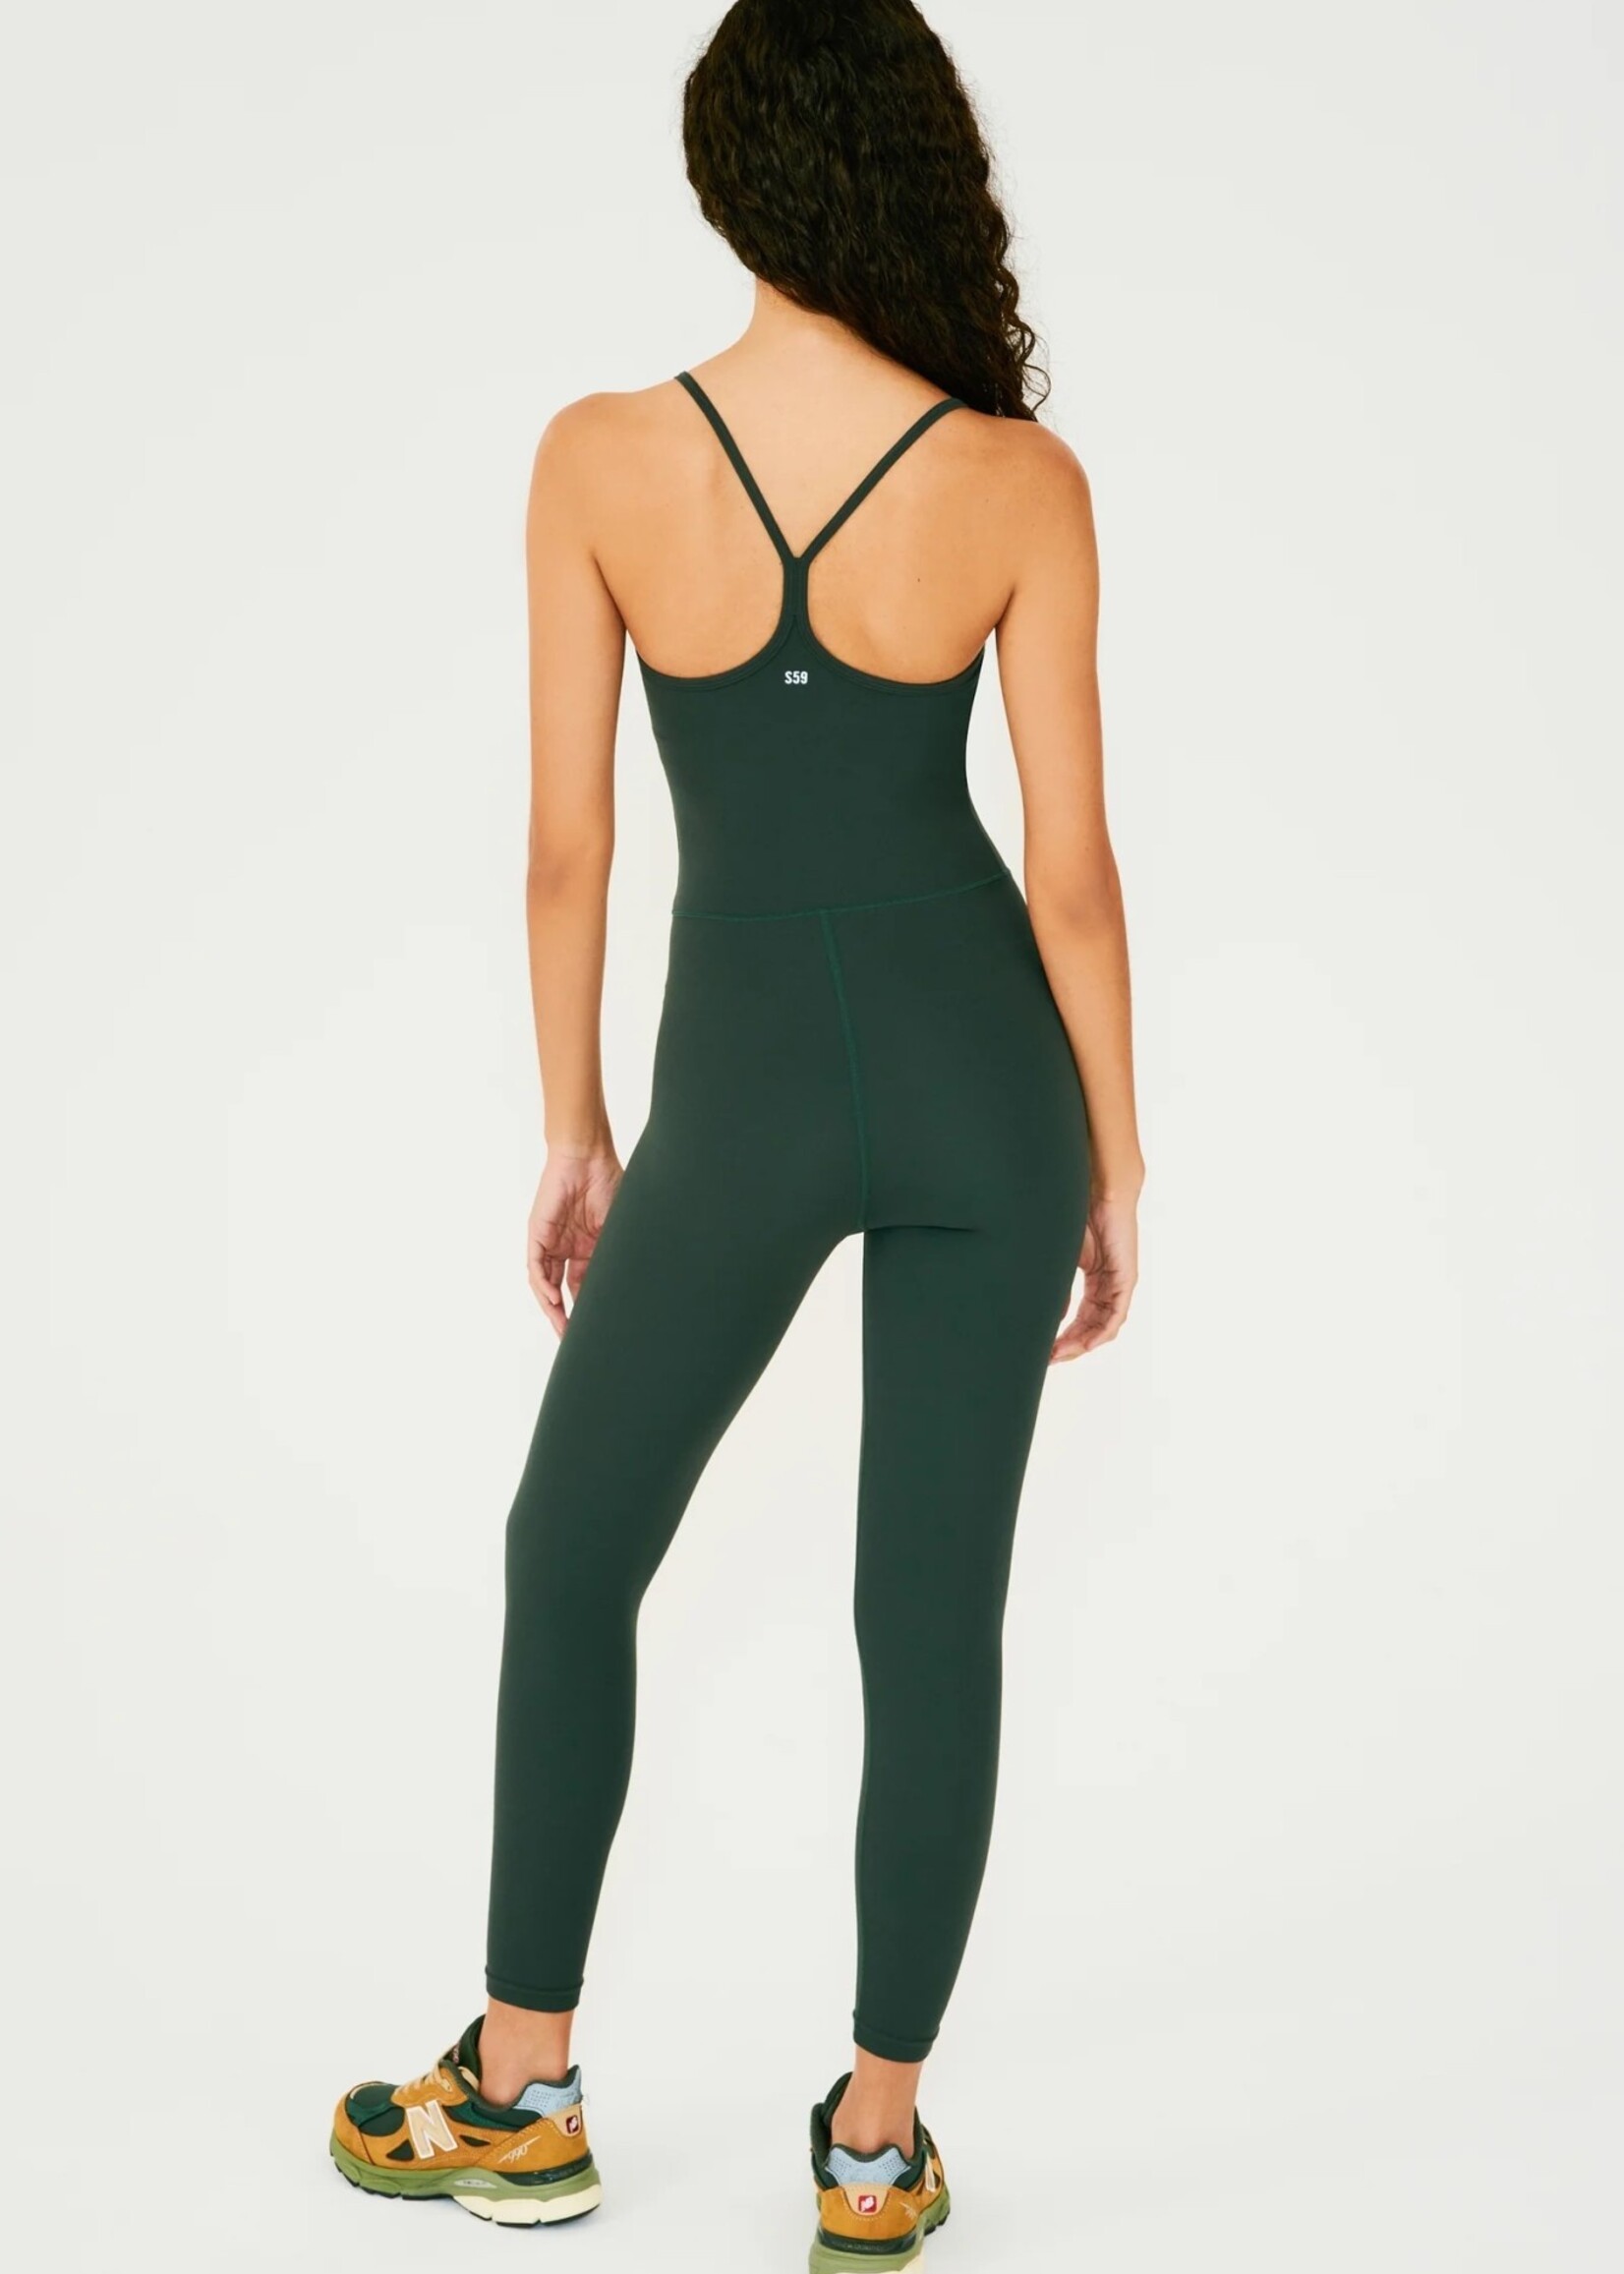 Splits59 Airweight Jumpsuit Military